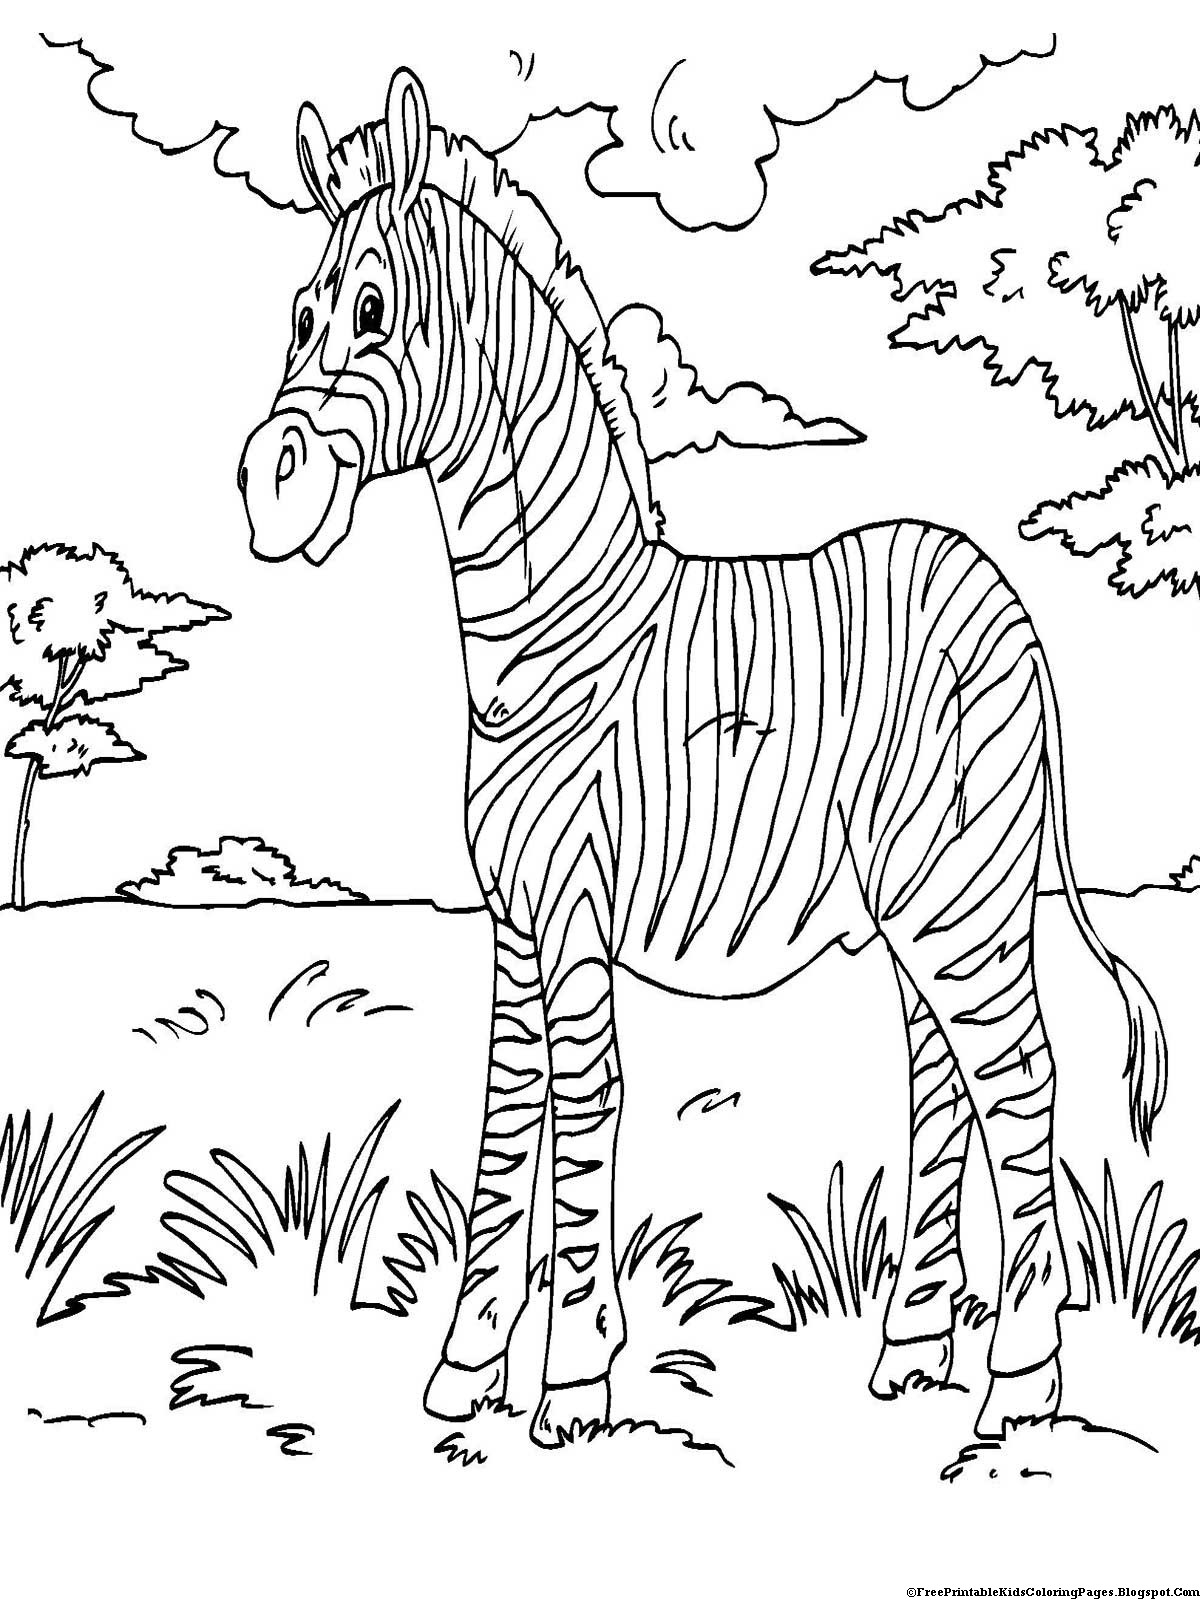 Zebra Coloring Pages Printable
 Zebra Coloring Pages